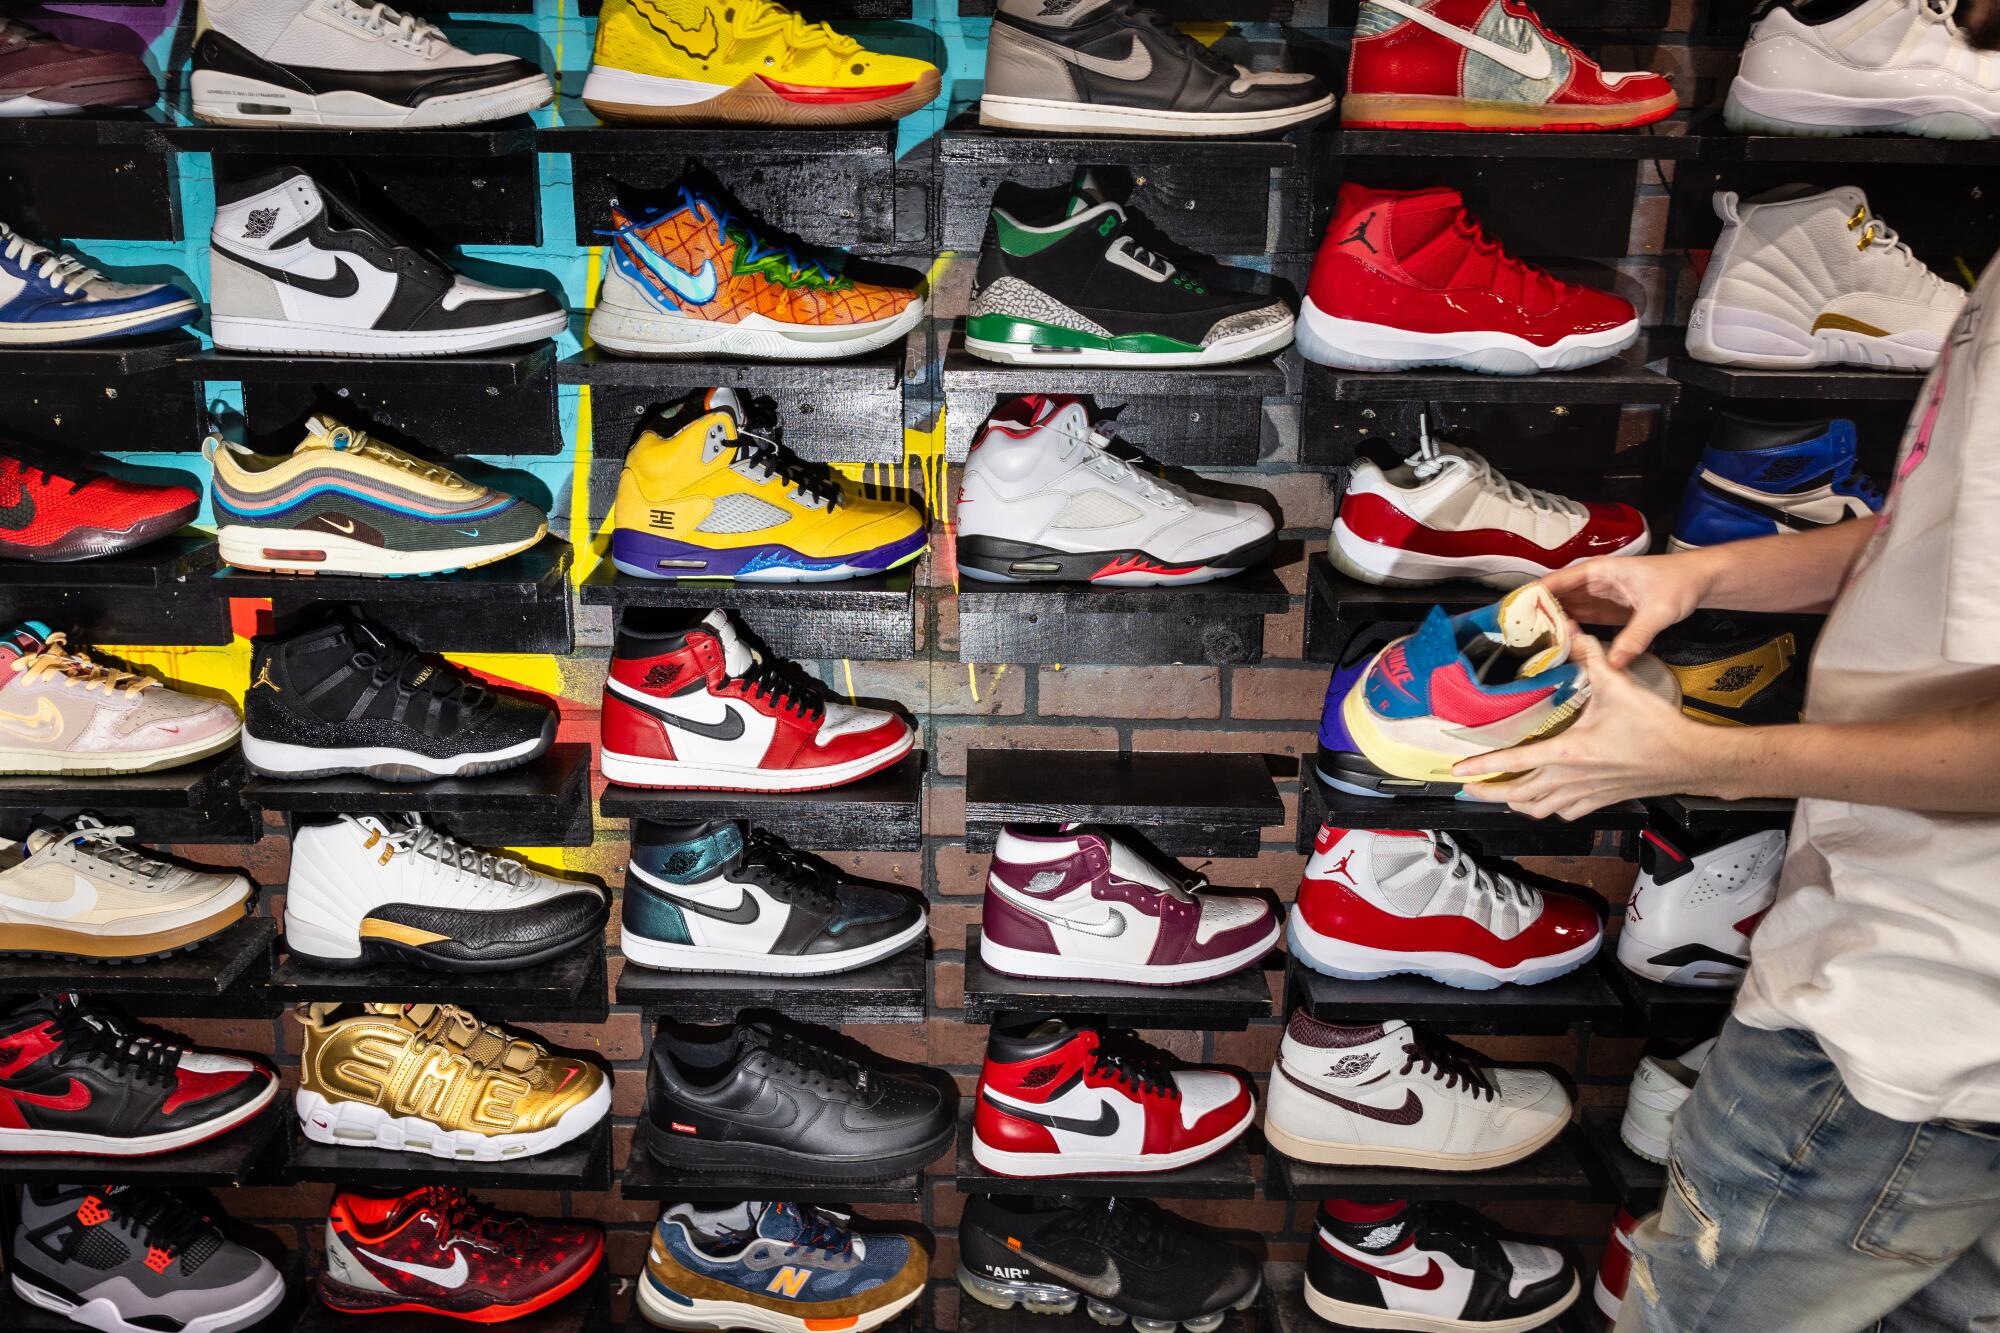 A wall of shoes and a person at the right holding a shoe